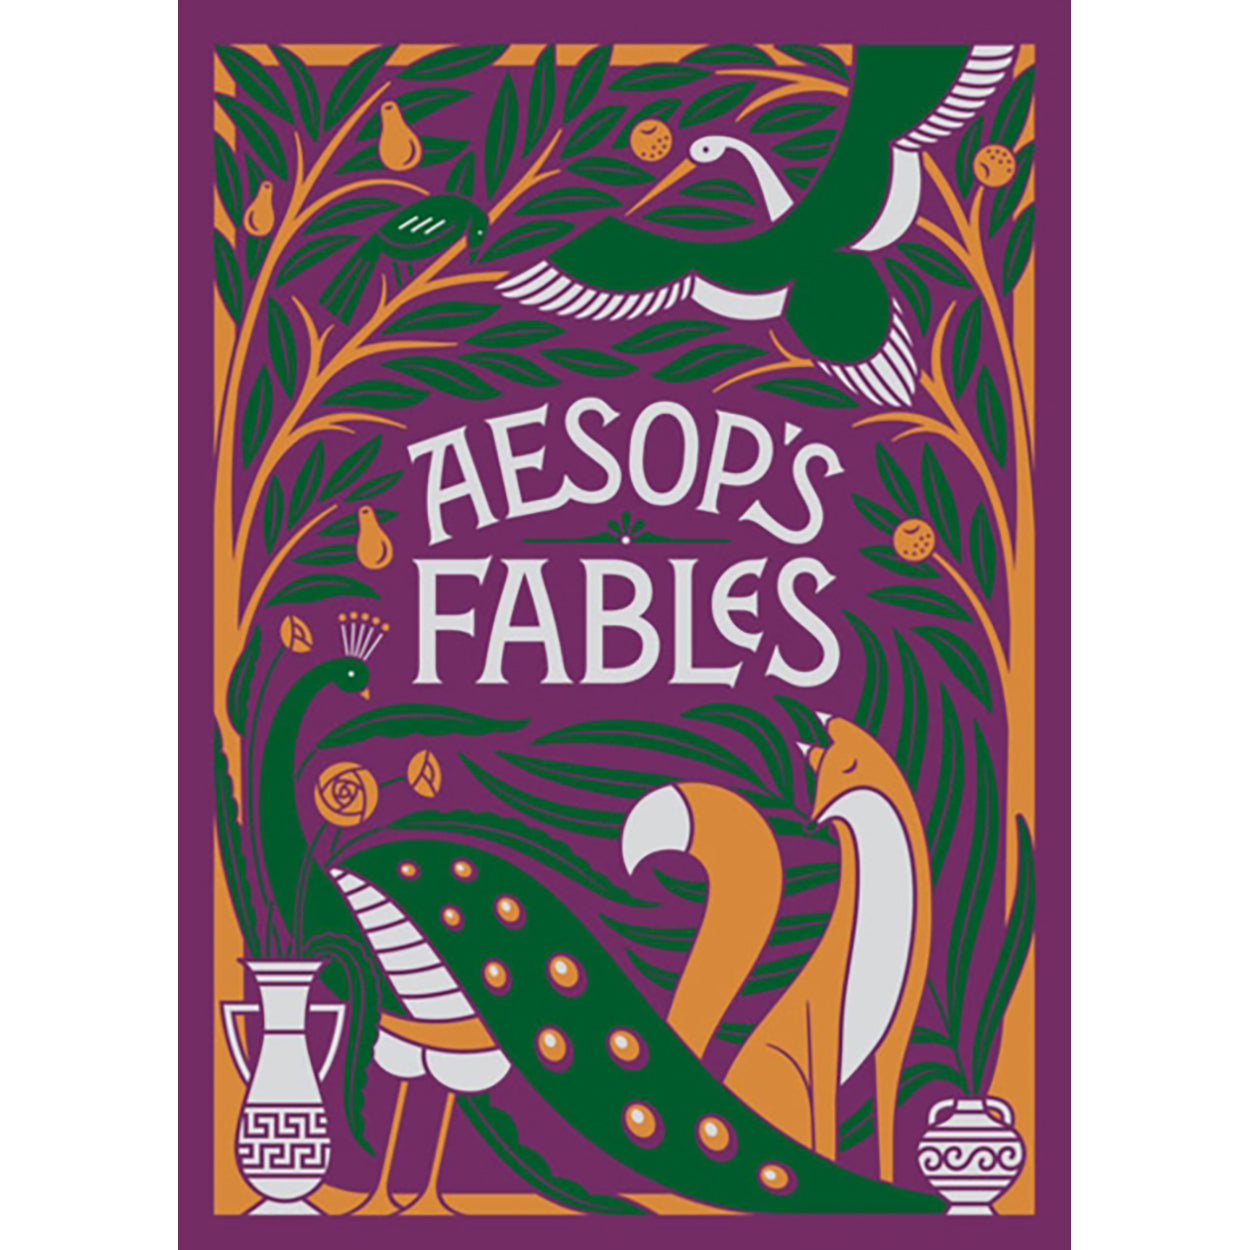 Aesop's Fables Front Cover (Hardback)